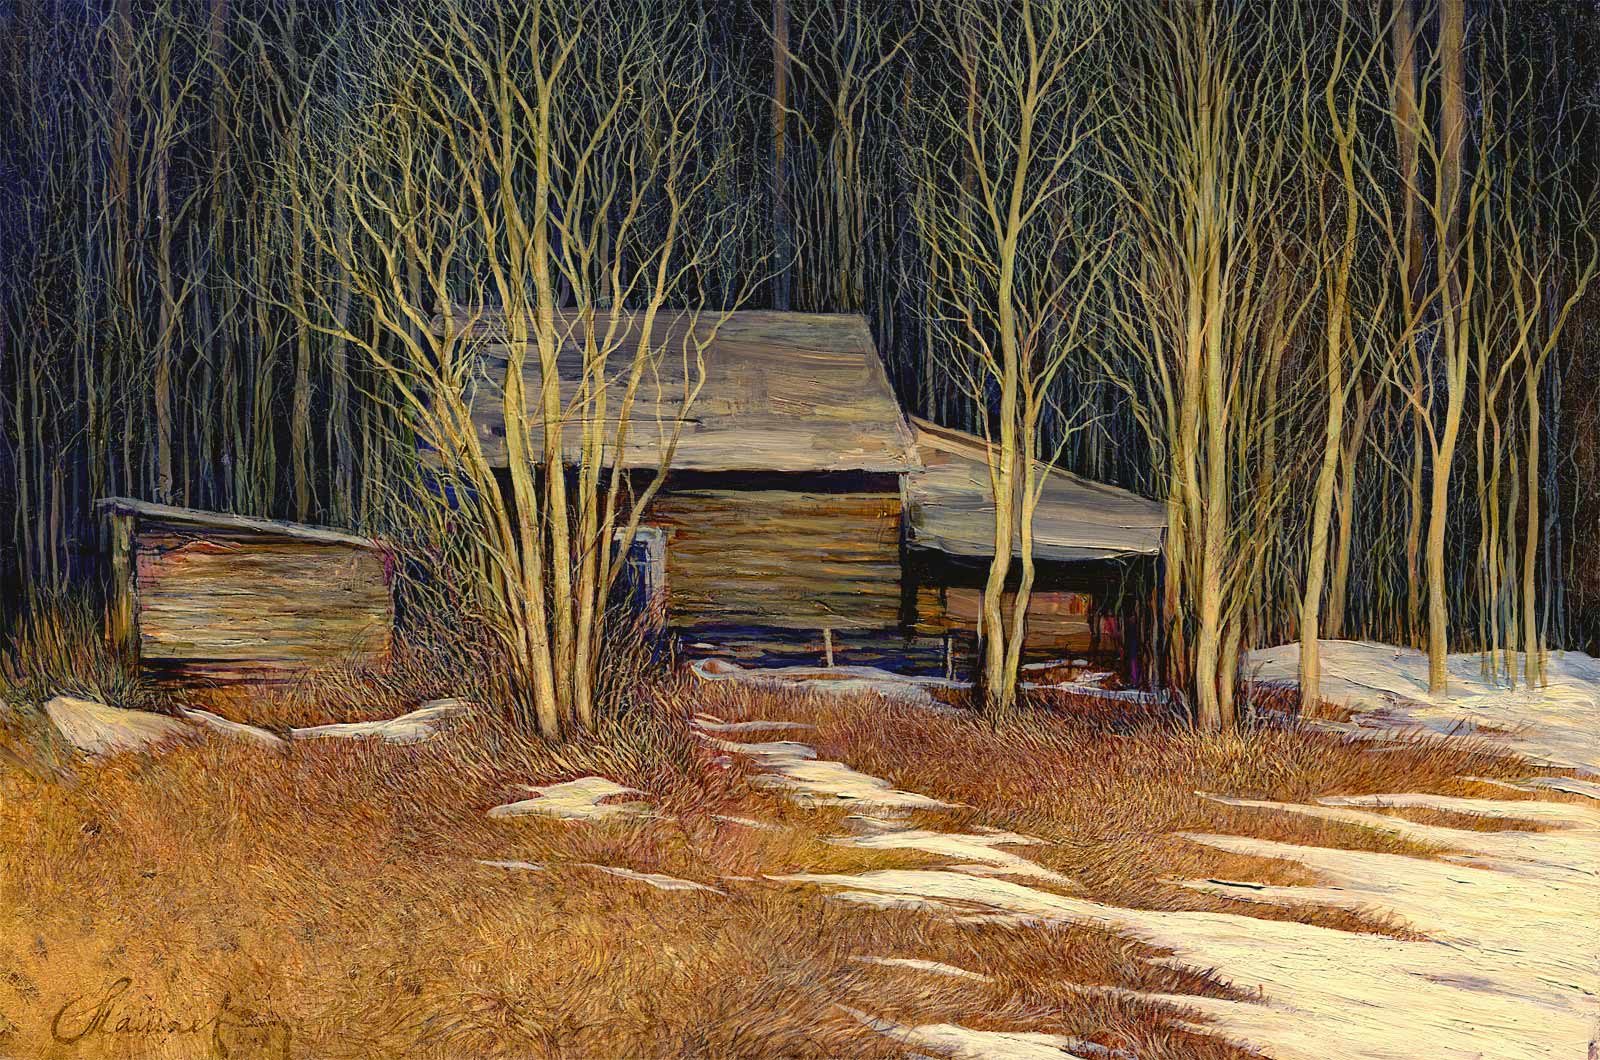 In the Village - 1, Andrey Mamaev, Buy the painting Oil